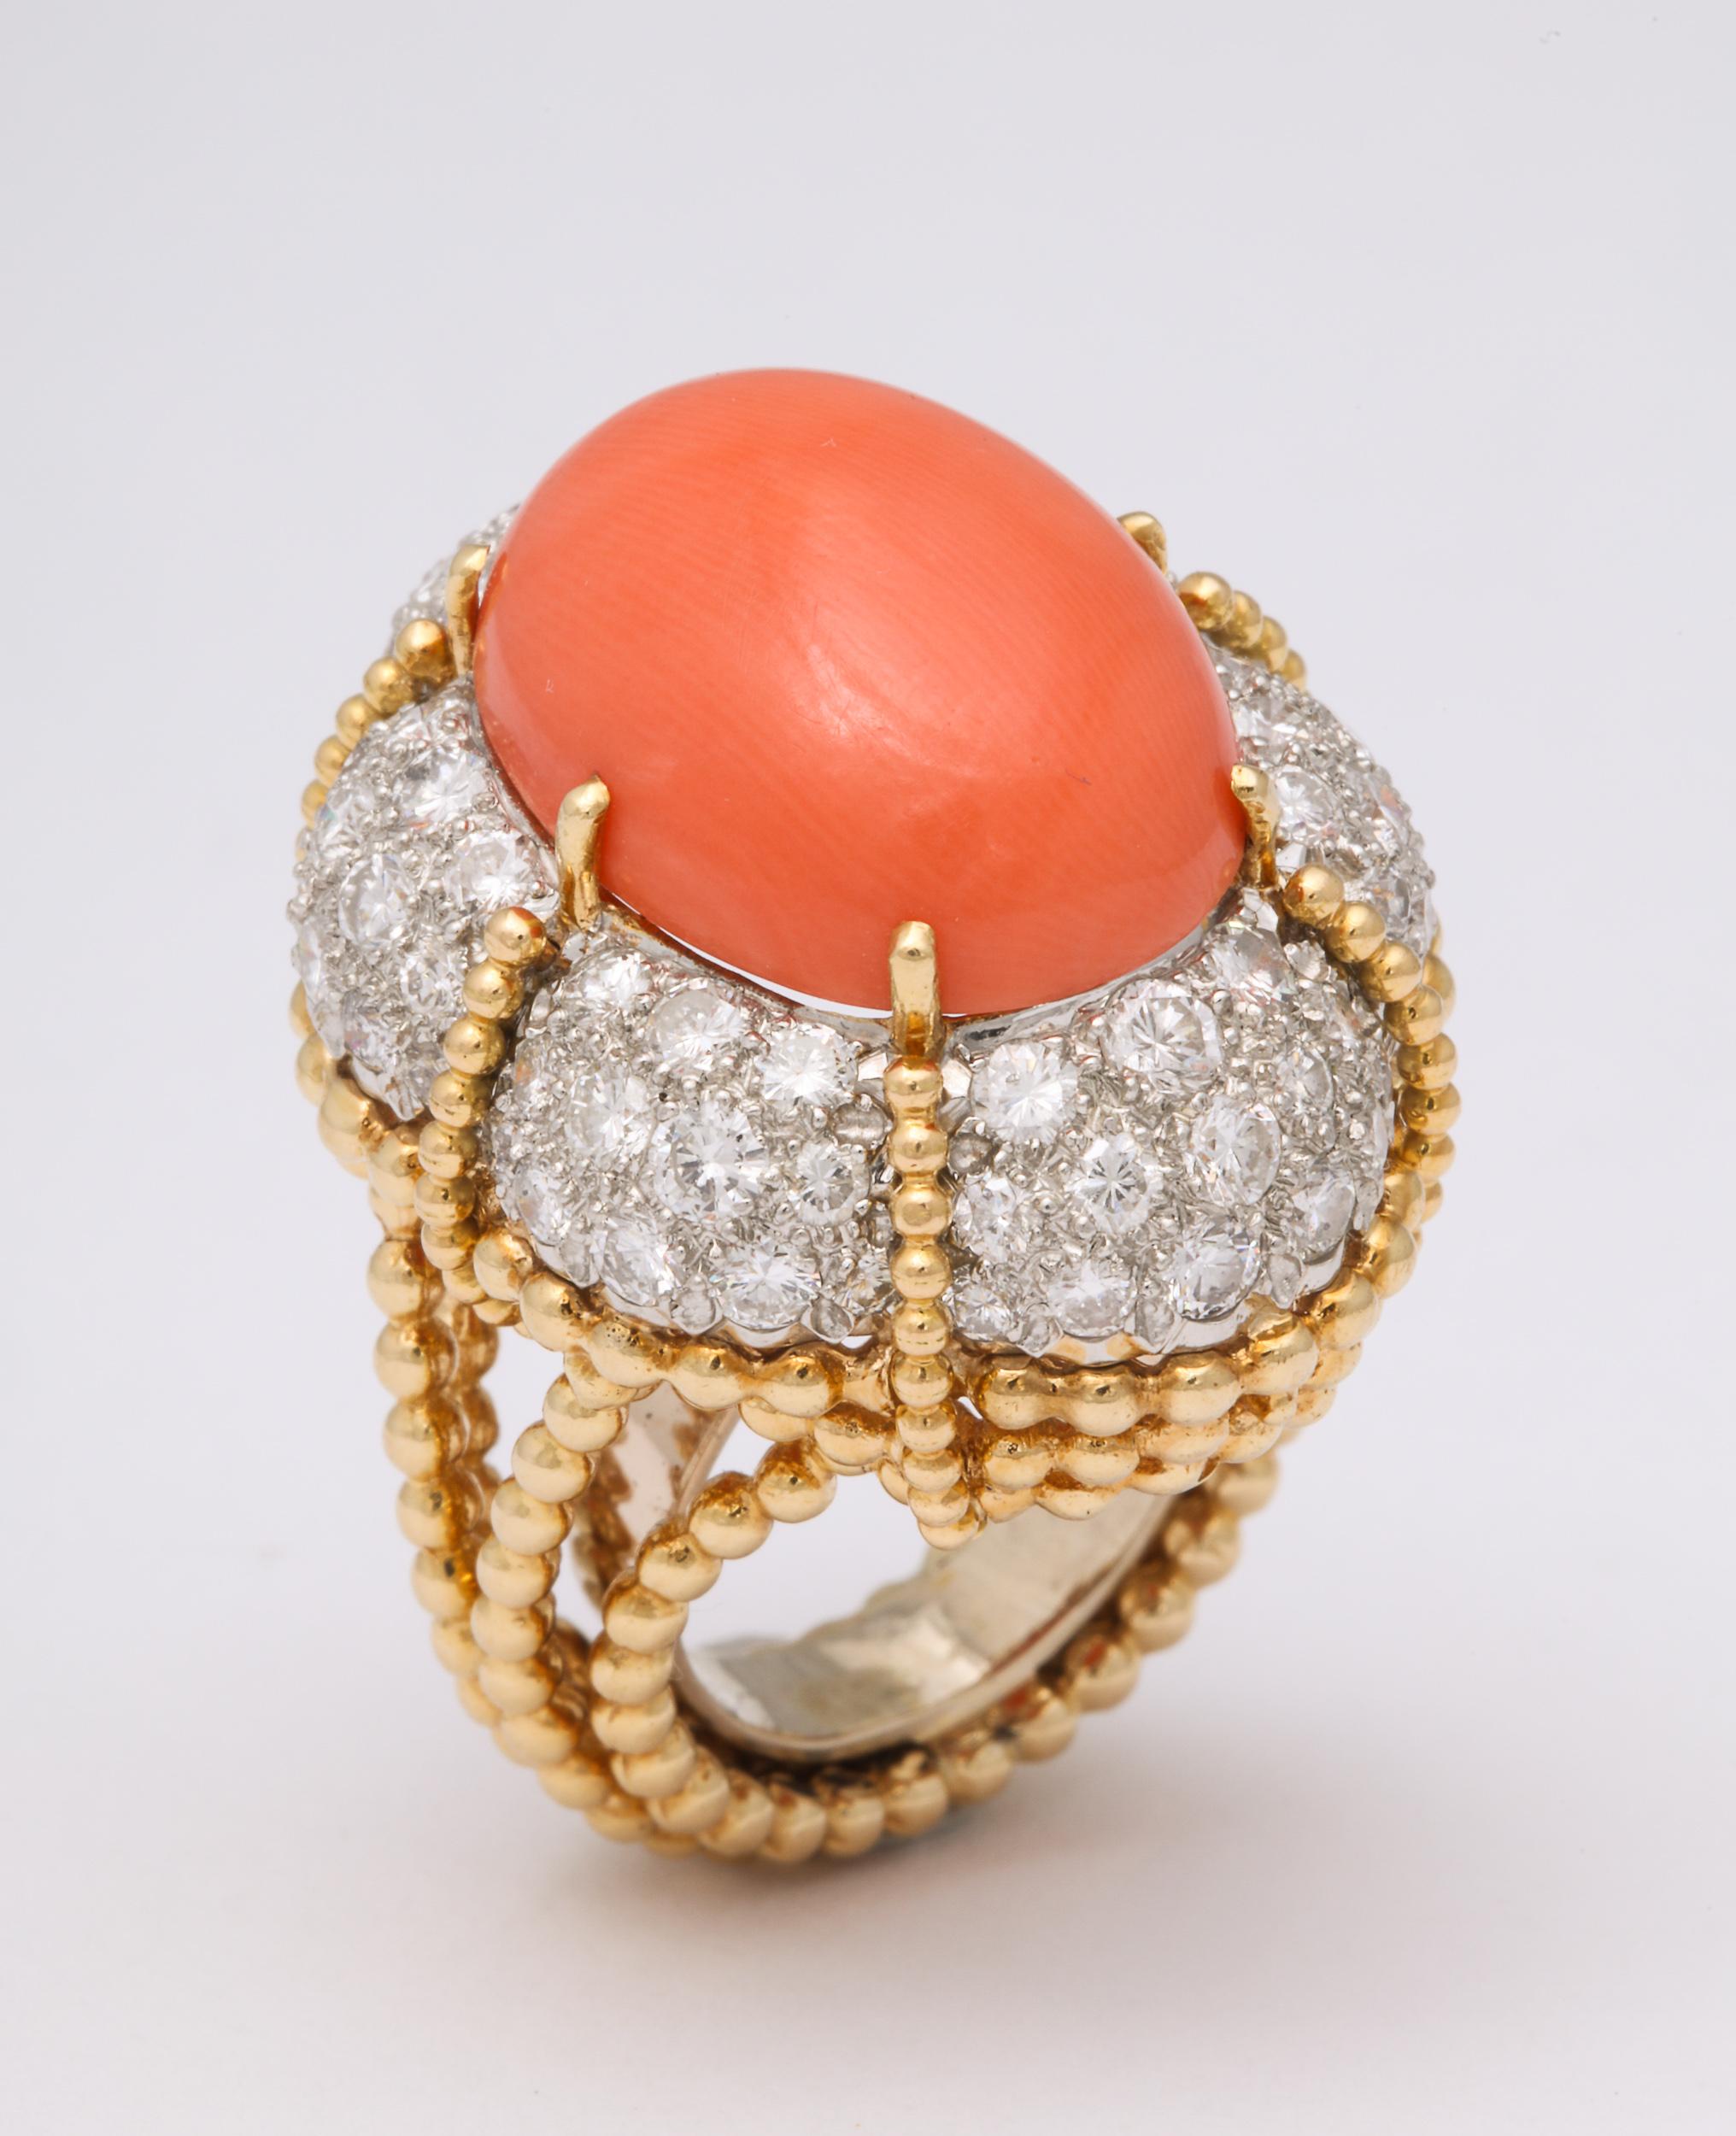 Baroque Oversize Orange Coral and Pave Diamond Ring